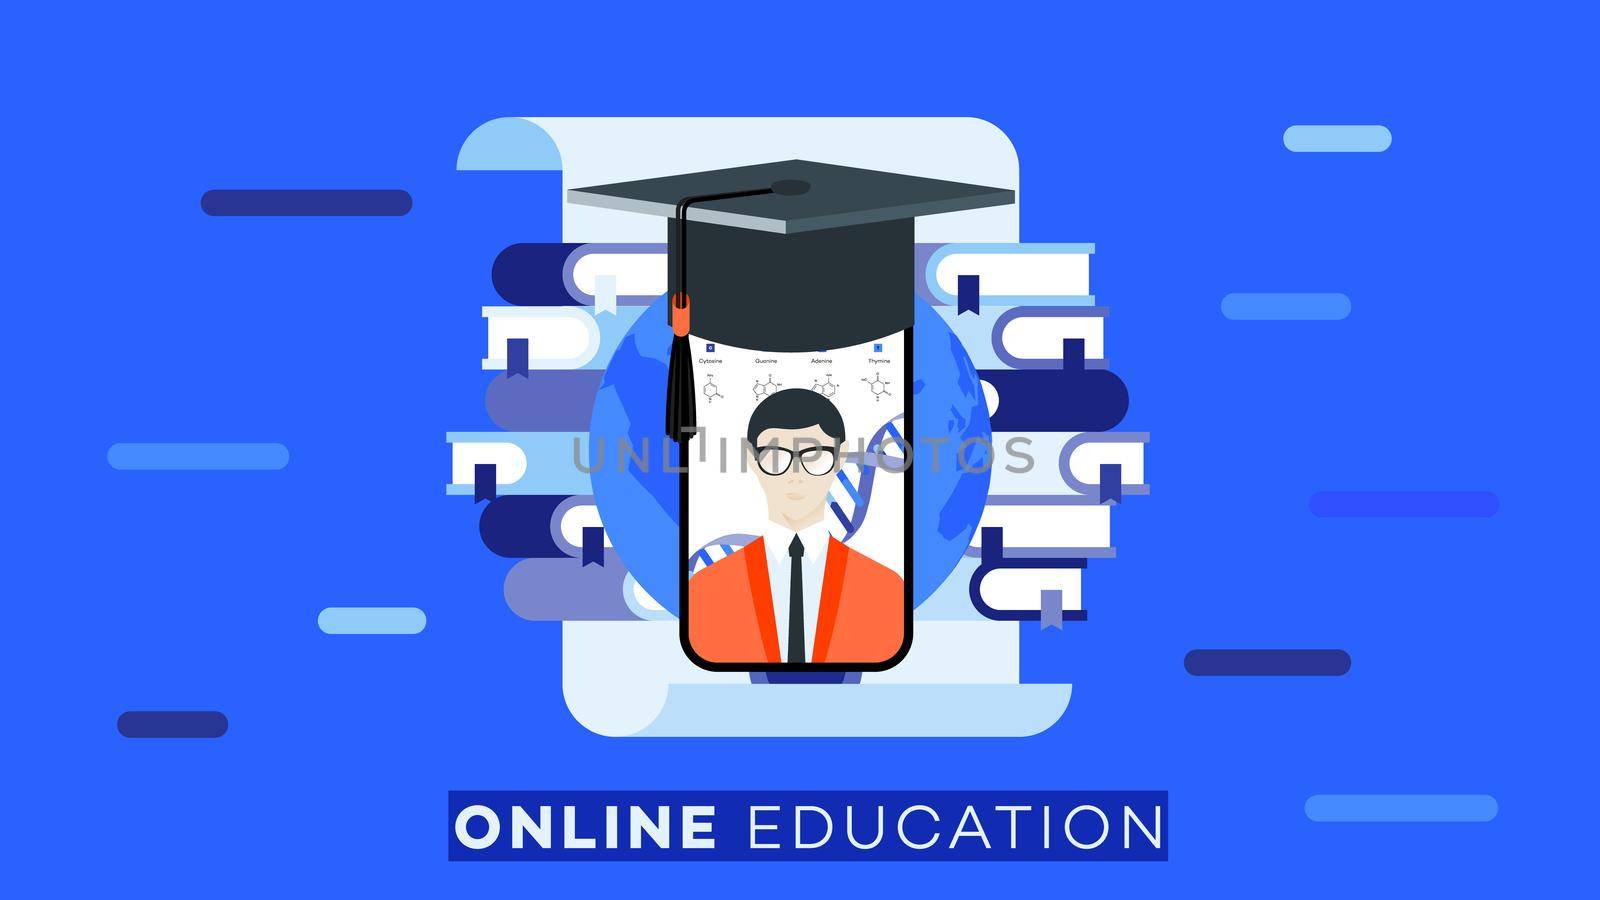 Conceptual e-learning flat vector ilustration. Distance education as solution for worldwide online learning.